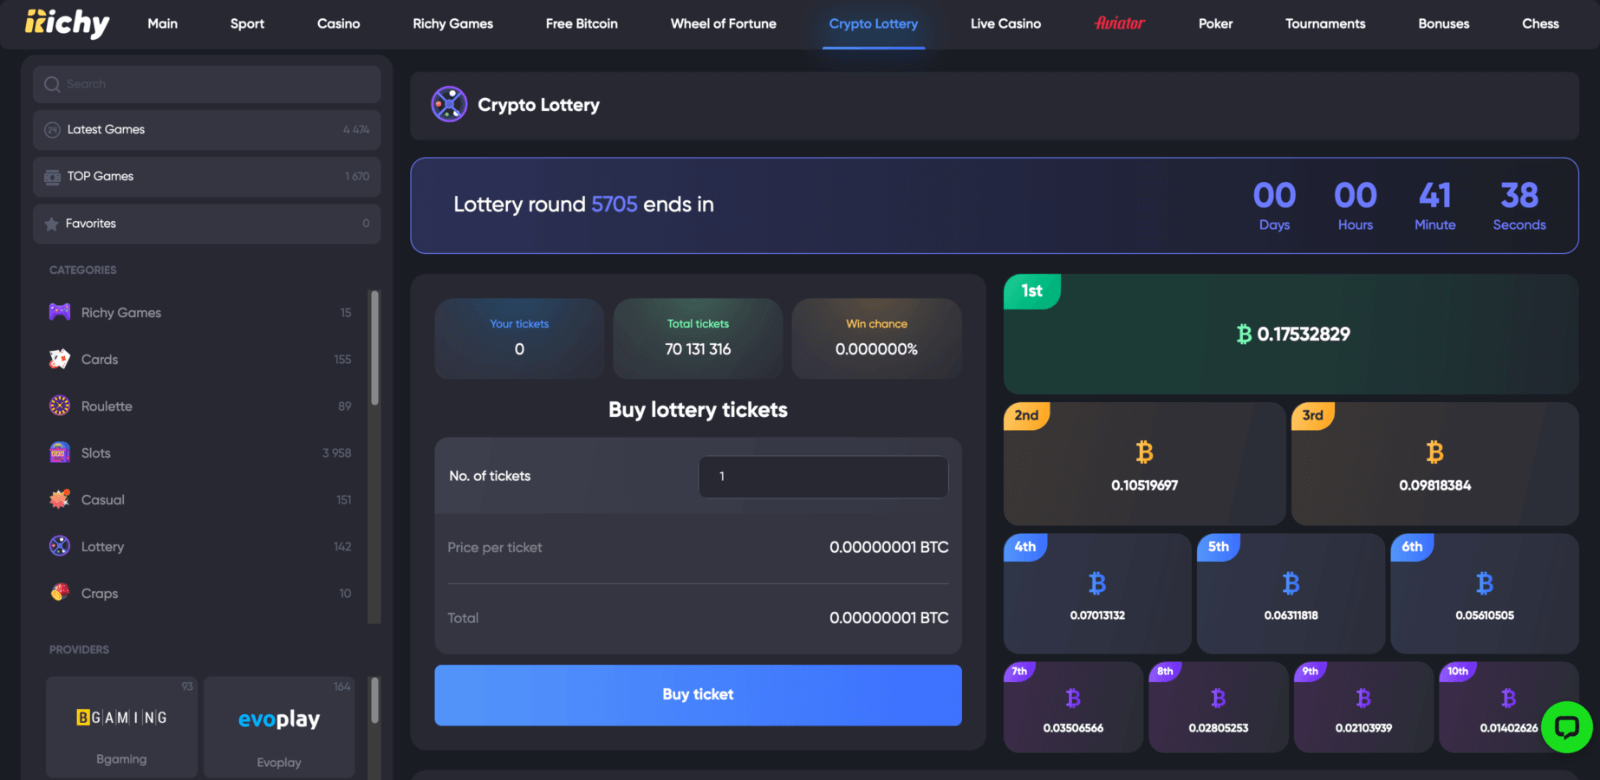 On the official website of Richy Casino platform, crypto lotteries are available to users from India